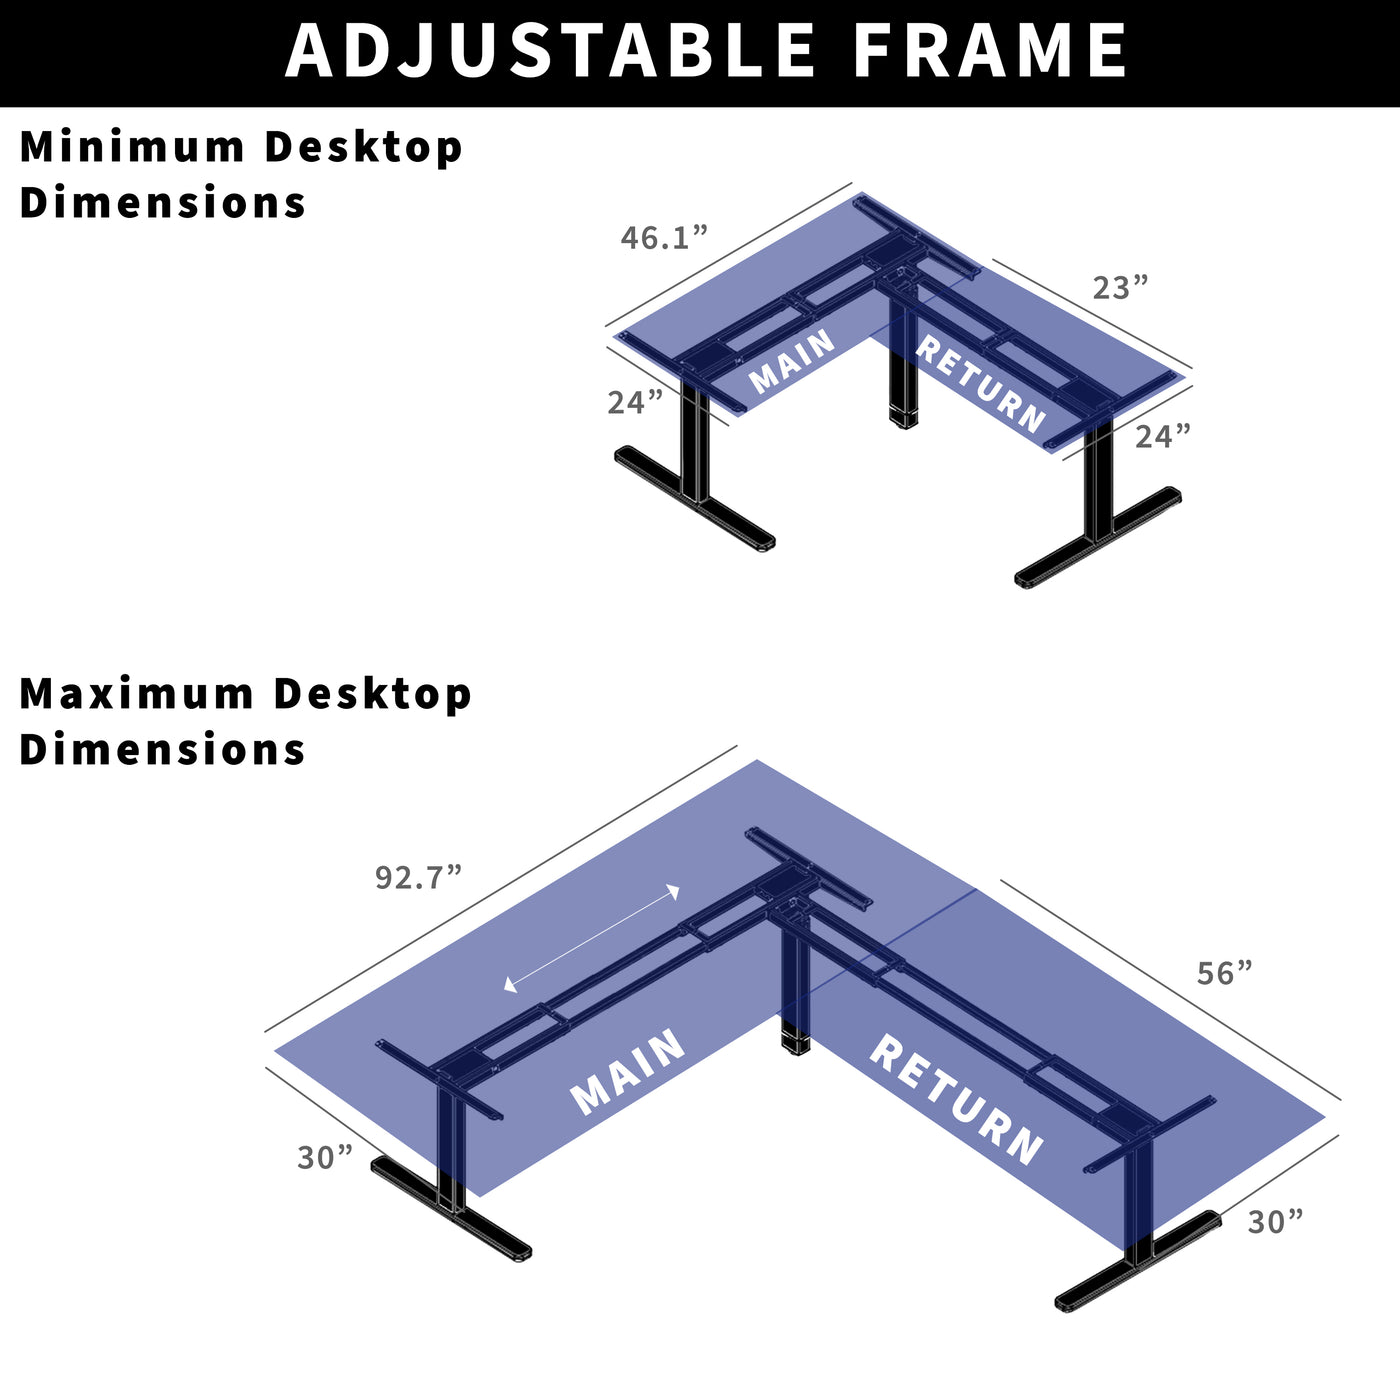  A variety of setup options are available with this multi-motor-legged desk frame.